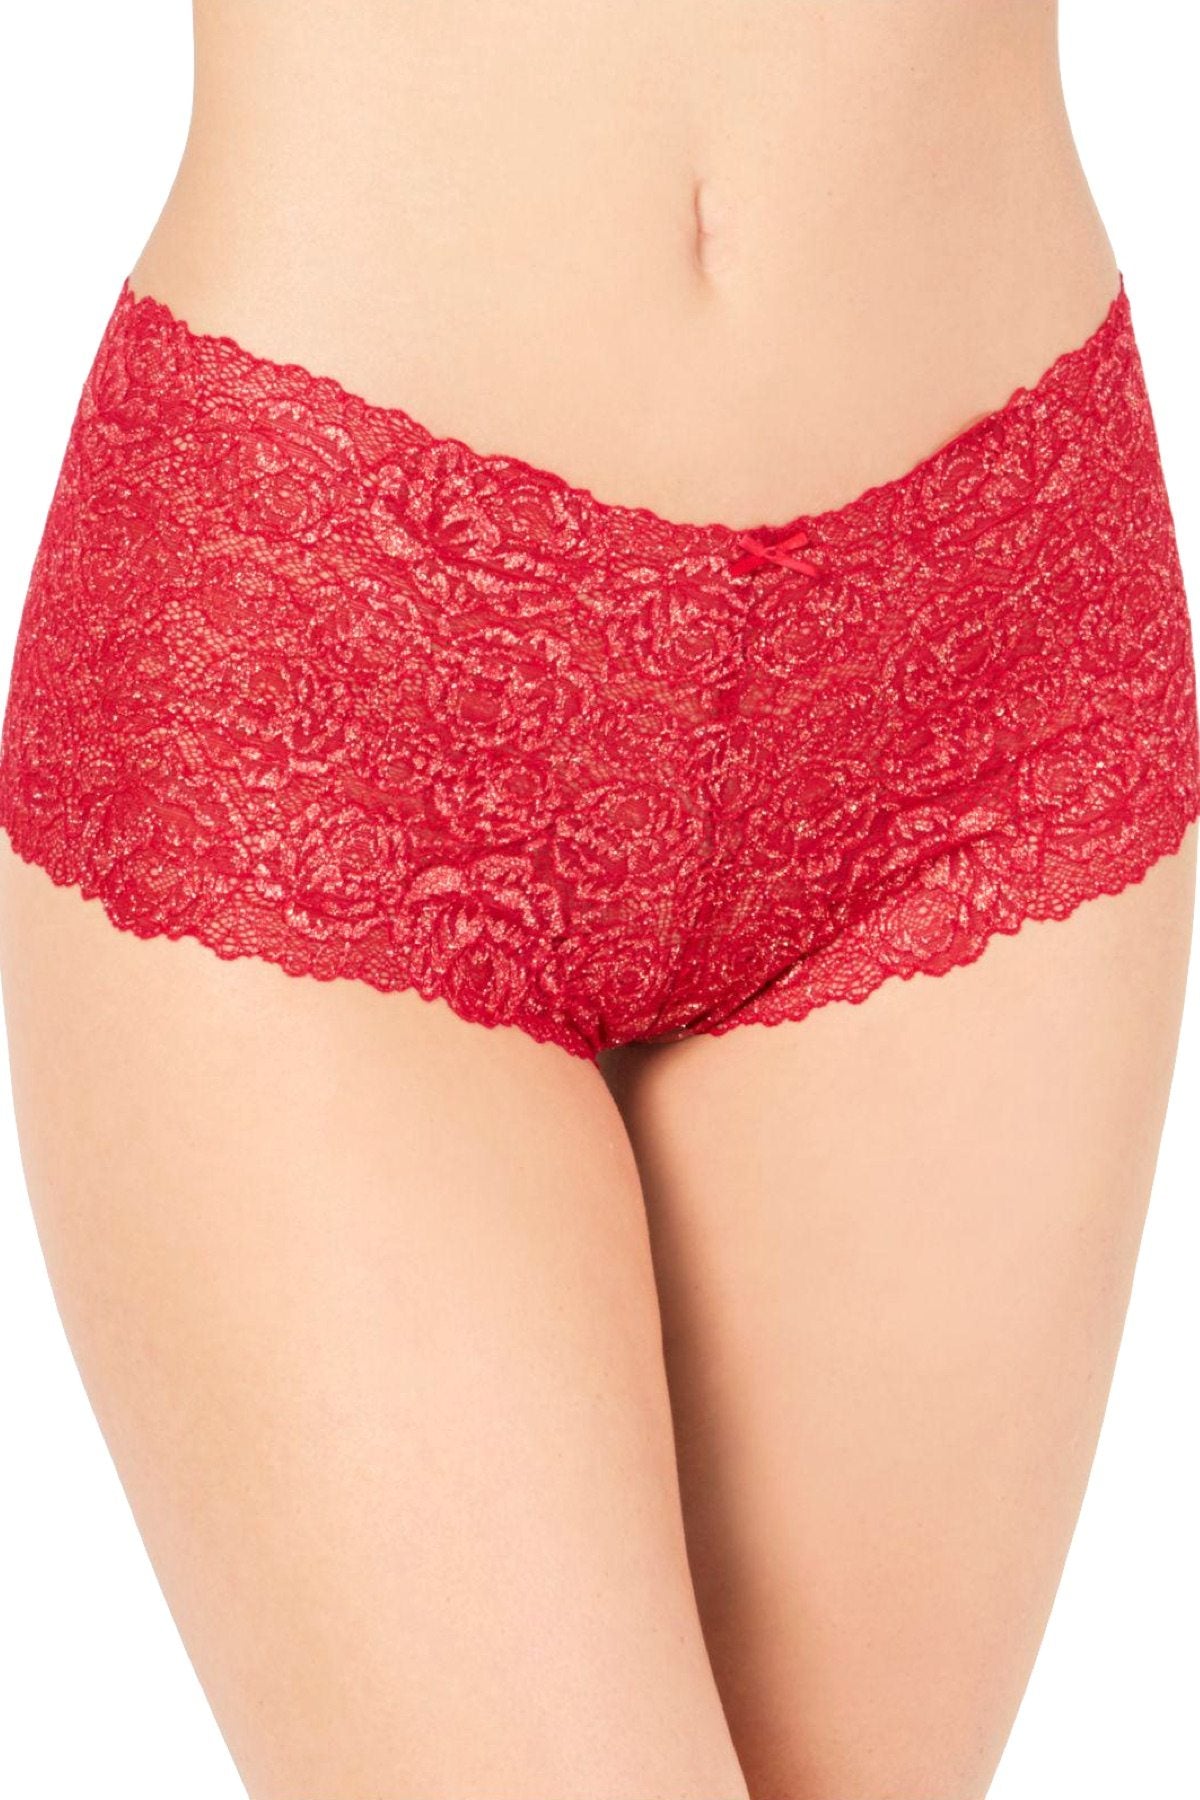 INC International Concepts Lace Boyshort in Cherry Red